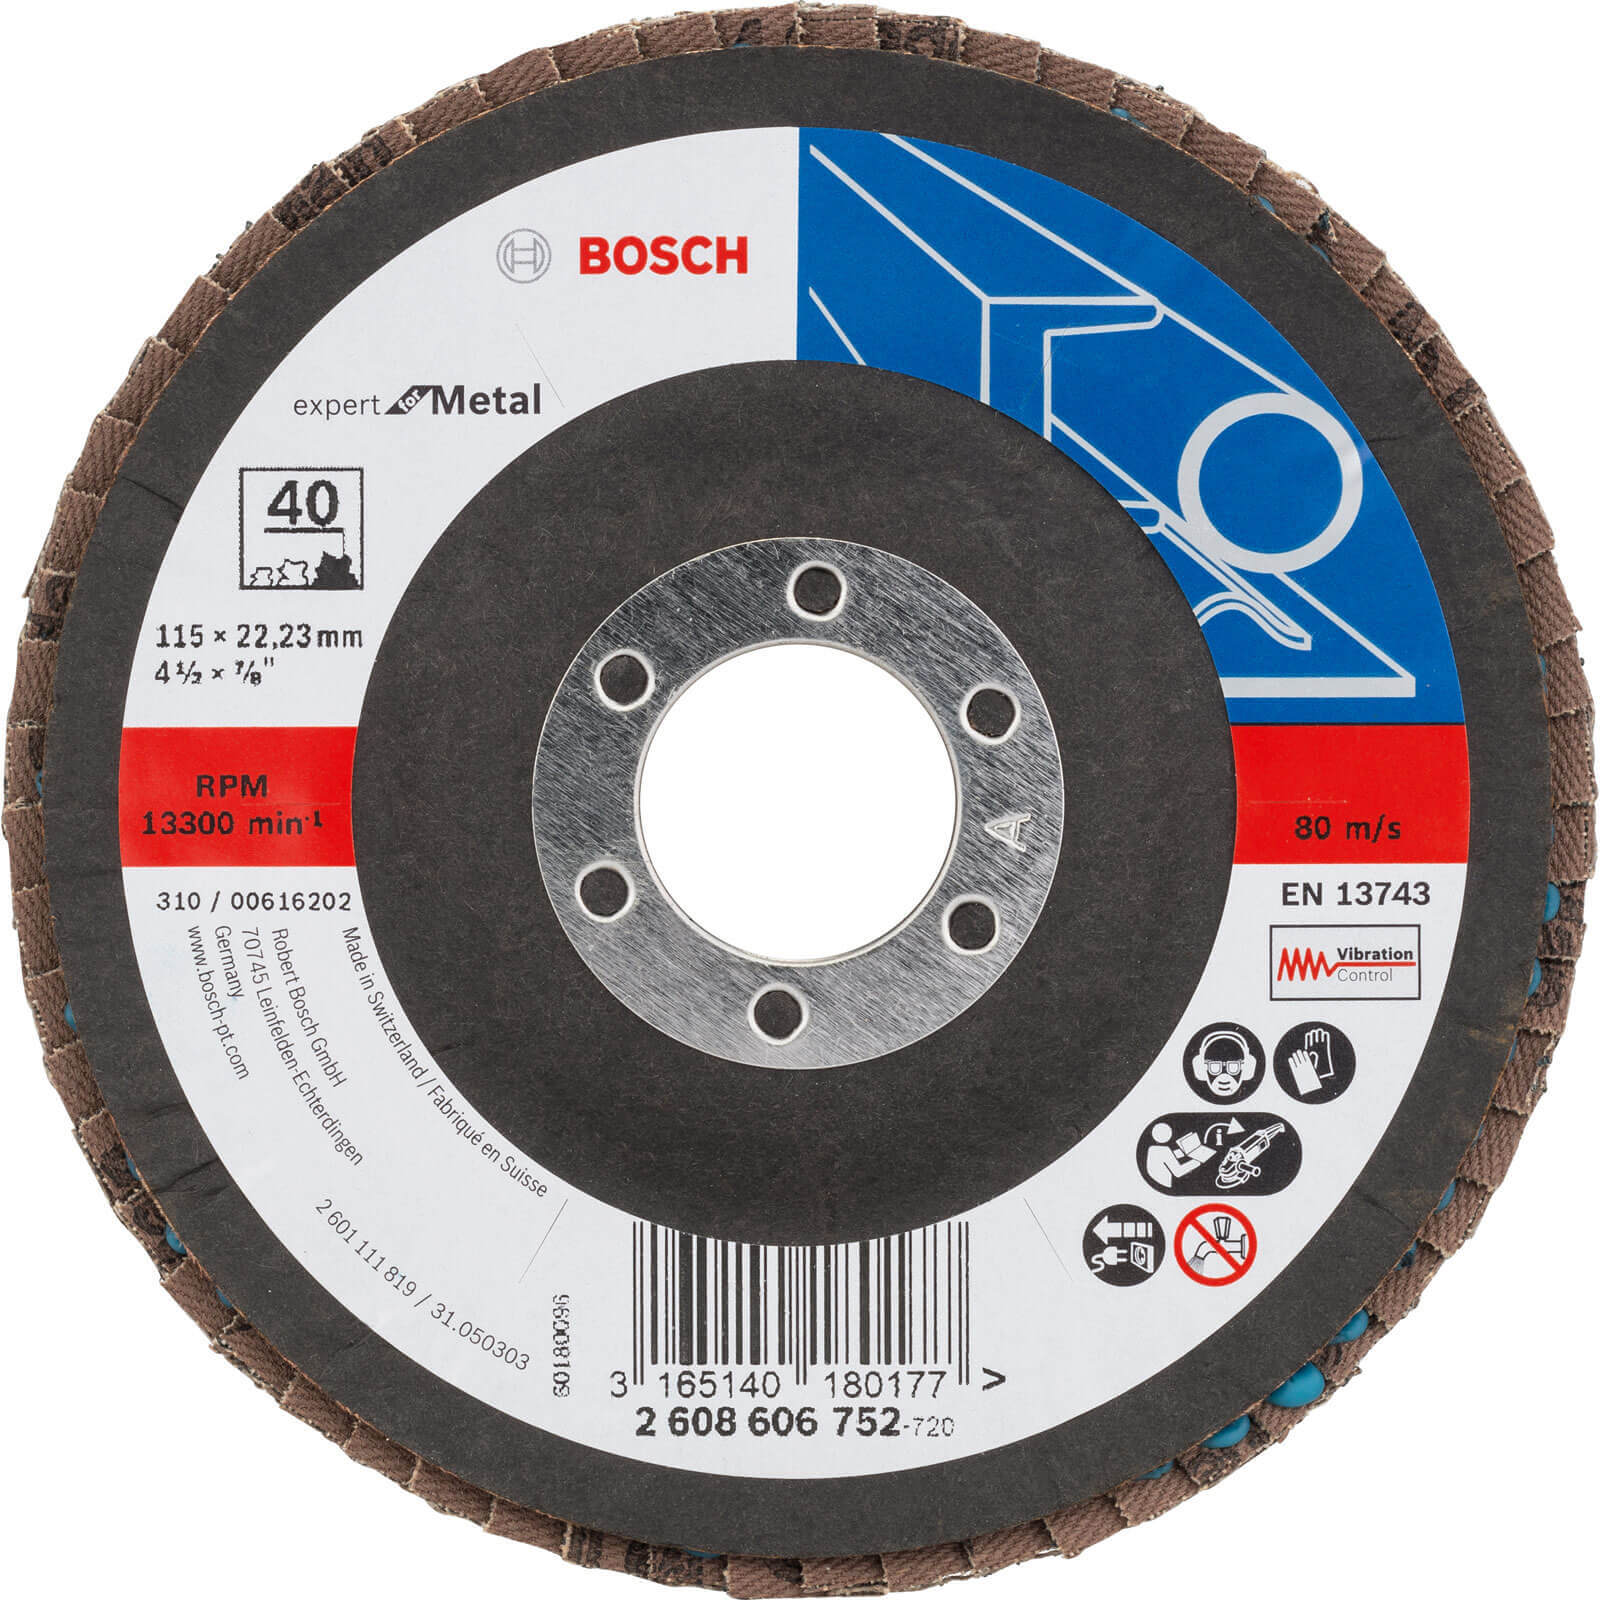 Photos - Cutting Disc Bosch Expert X551 for Metal Angled Flap Disc 115mm 40g Pack of 1 260860675 